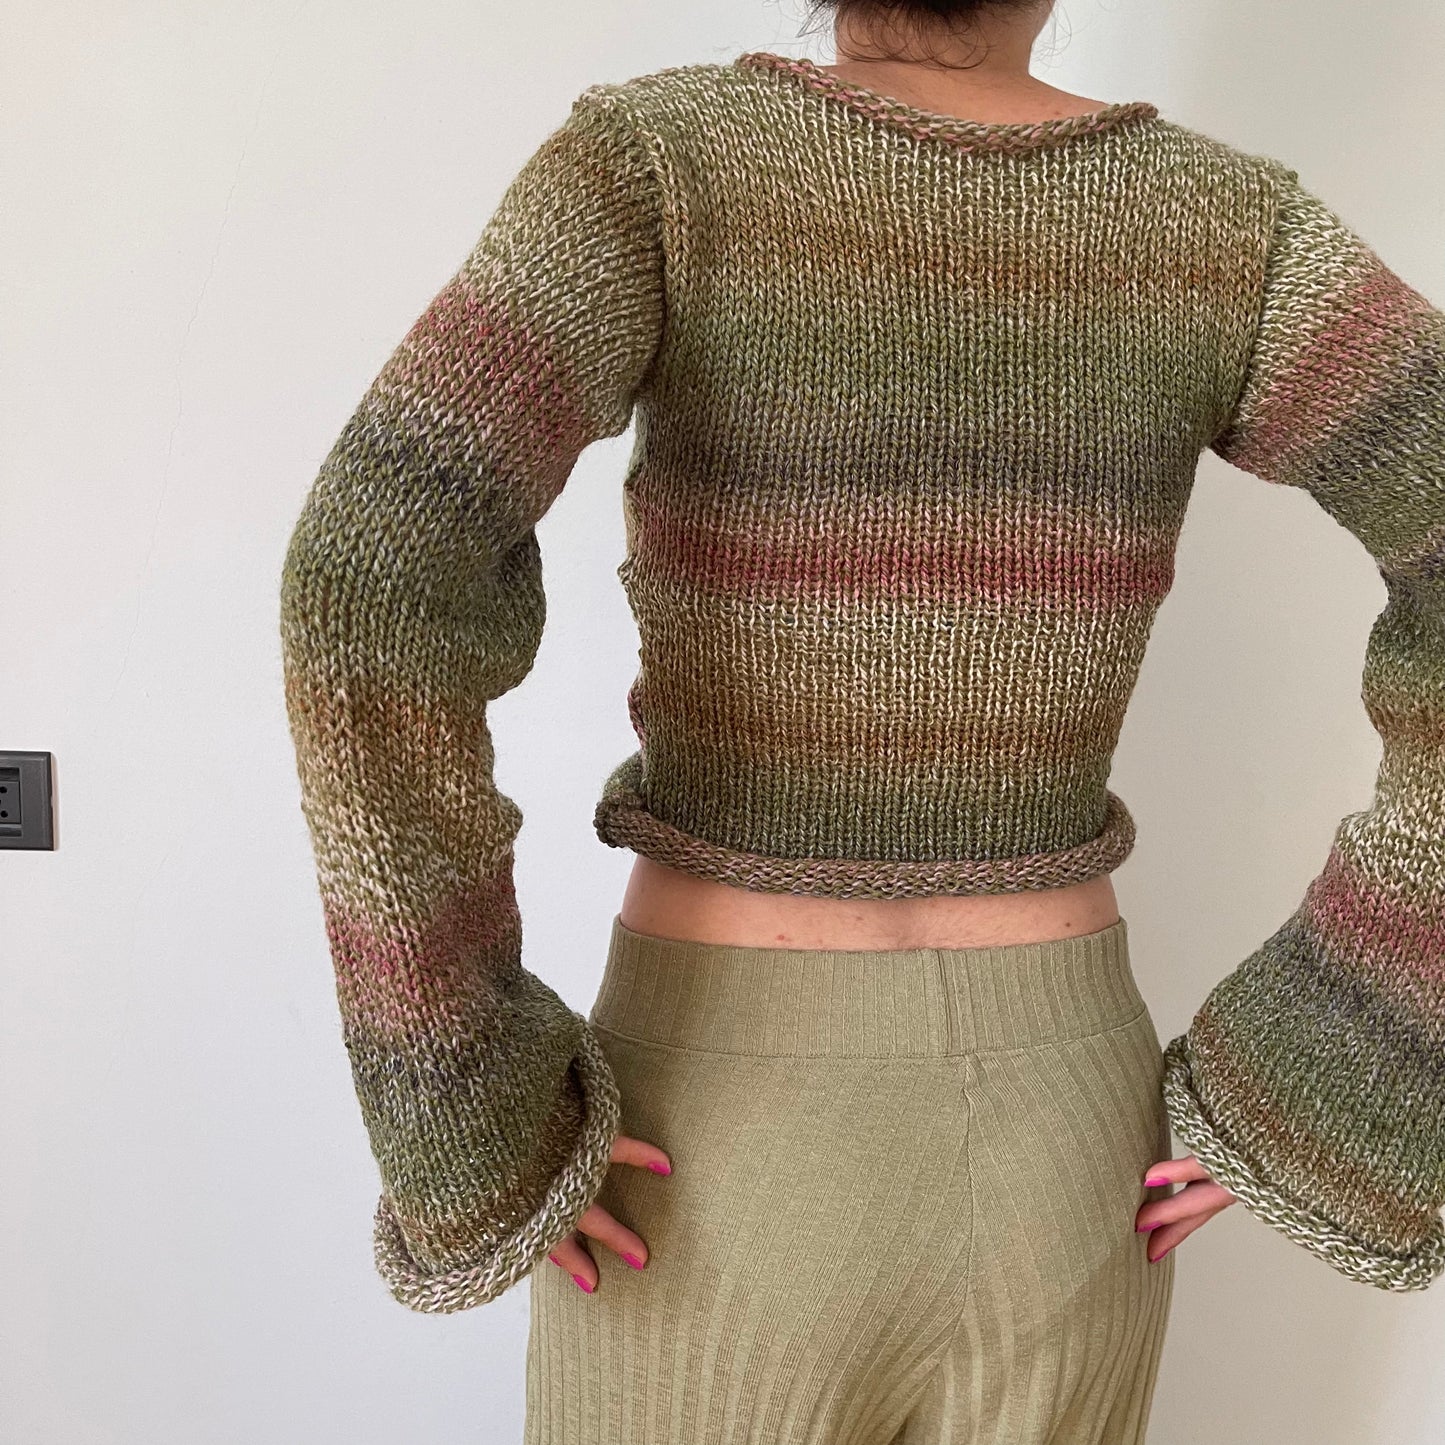 Handmade green, dusky pink and brown knitted ombré jumper